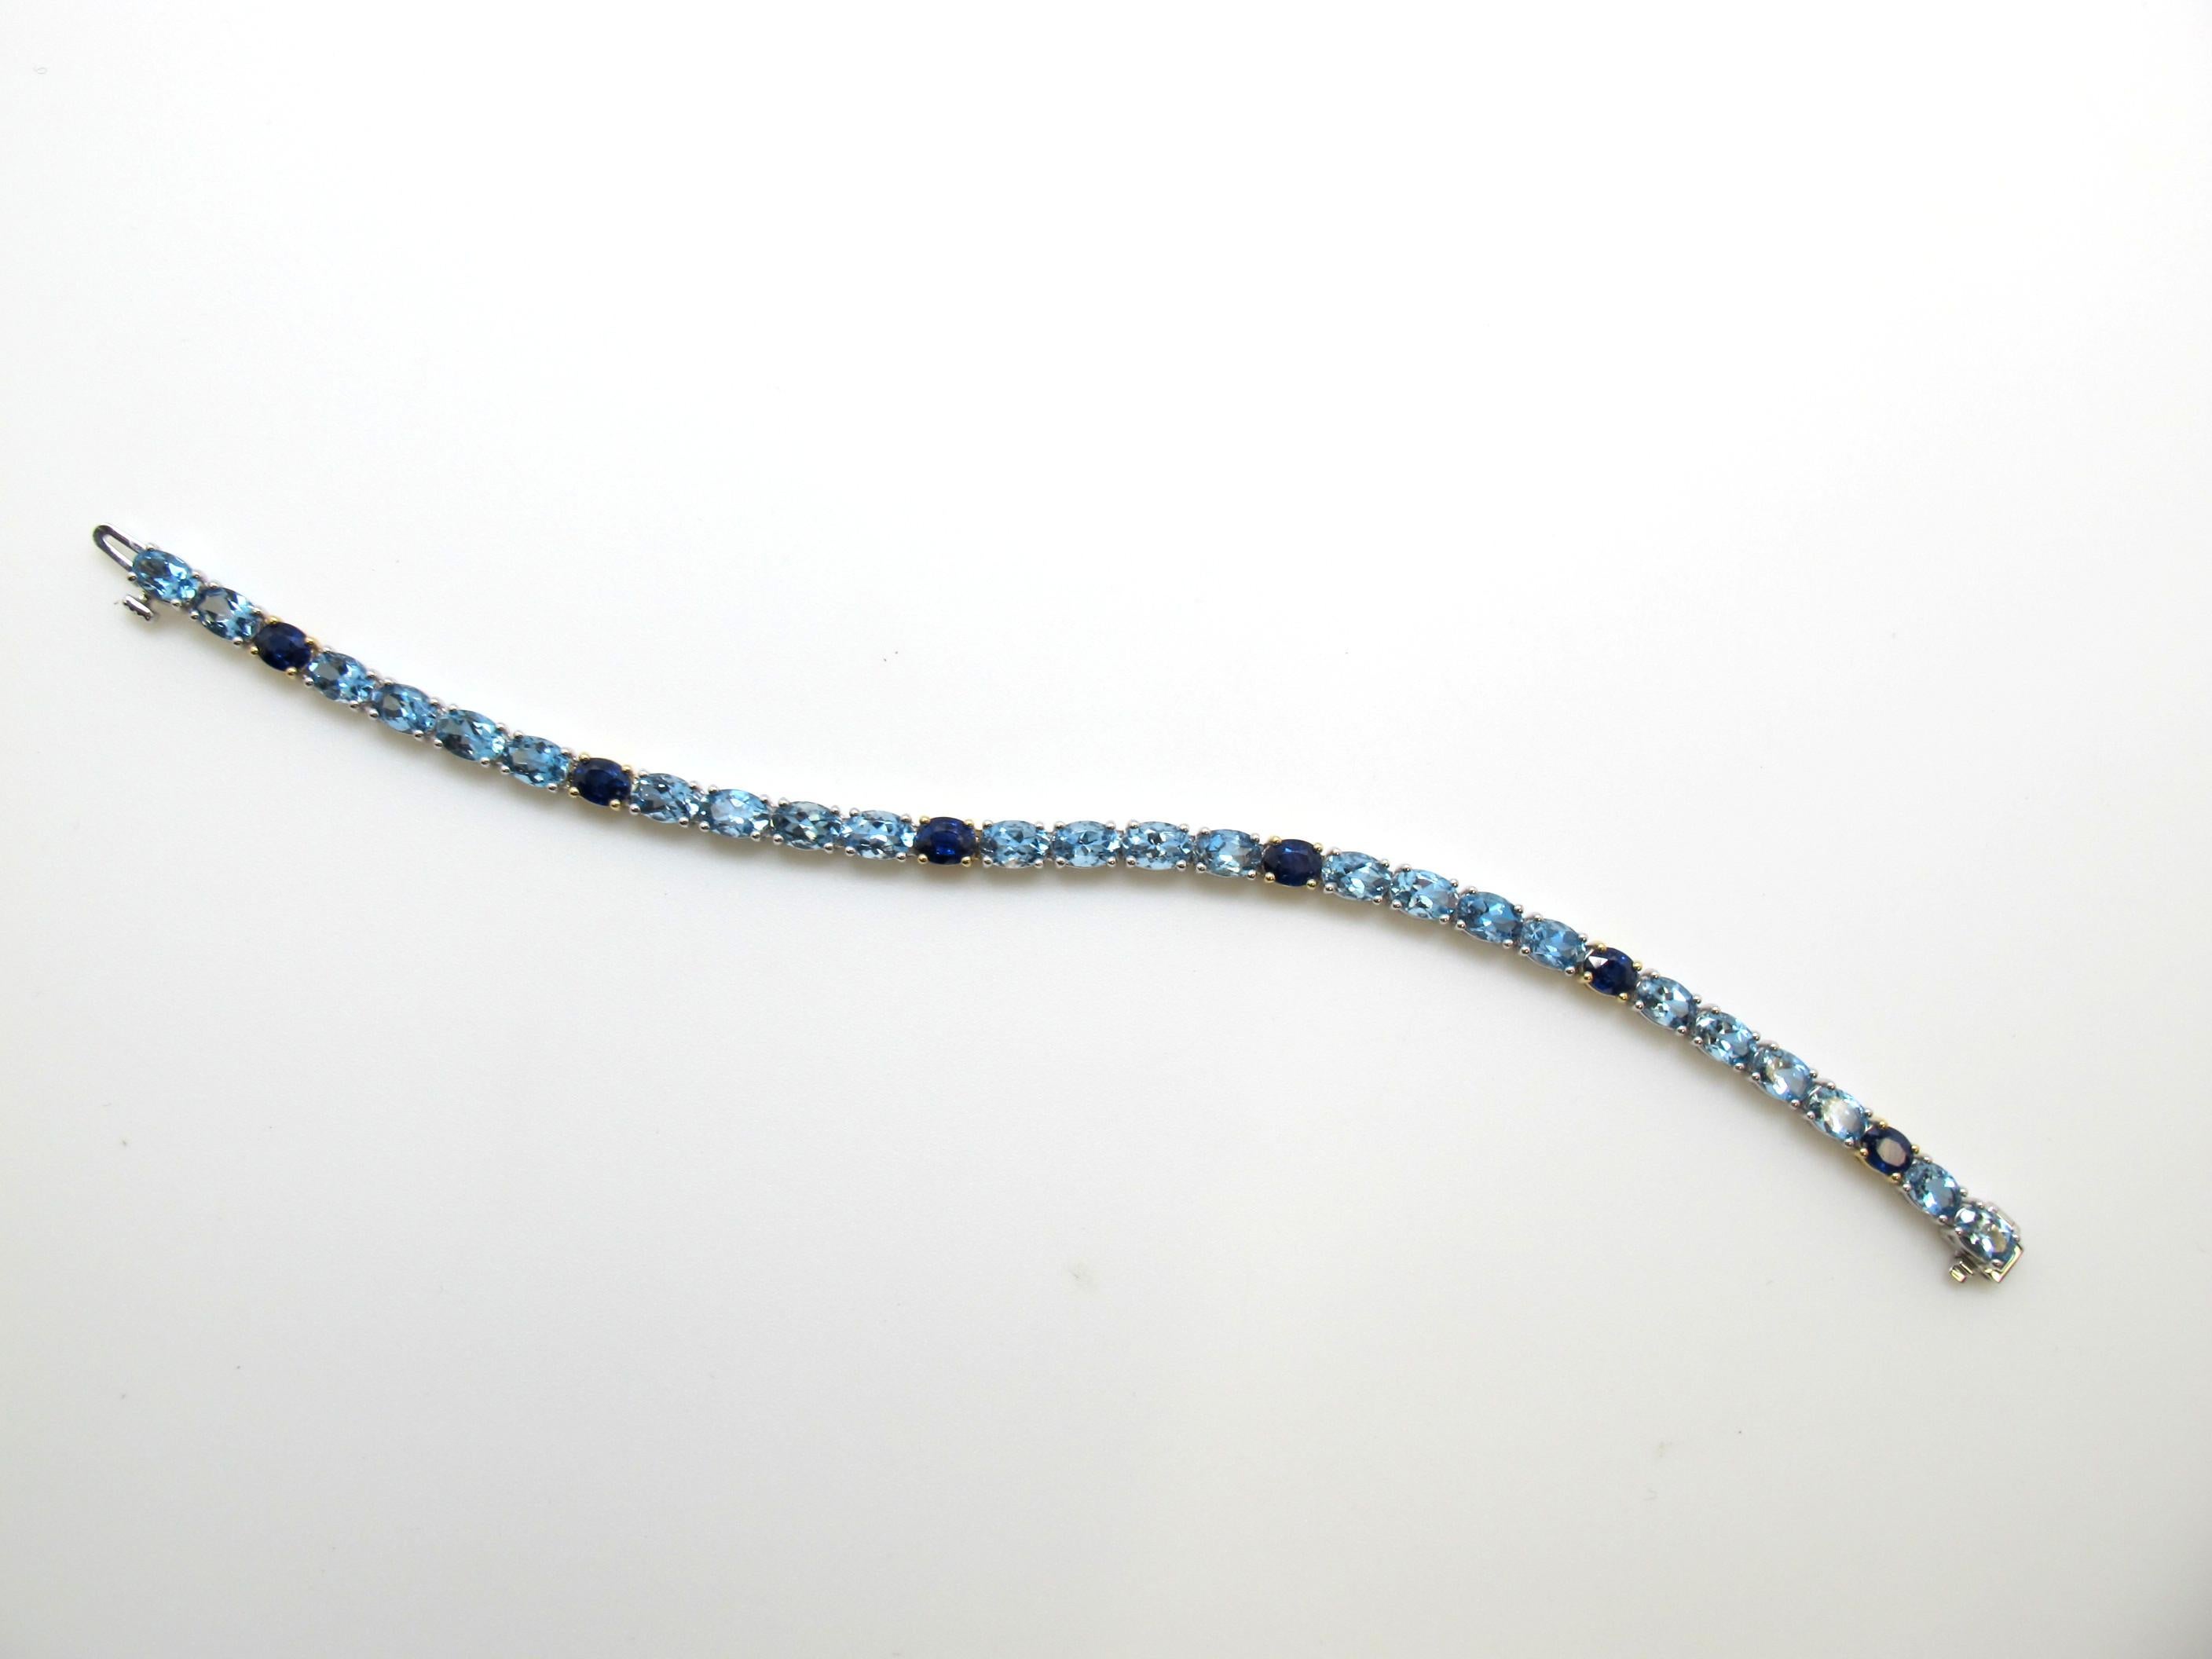 There is no denying how dazzling this piece is! The incredibly vibrant 24 aquamarine stones, measuring 6X4mm 10.26 carats total weight, and the six vivid blue sapphires, measuring 4X5mm 3.31 carats total weight make this bracelet truly one of a